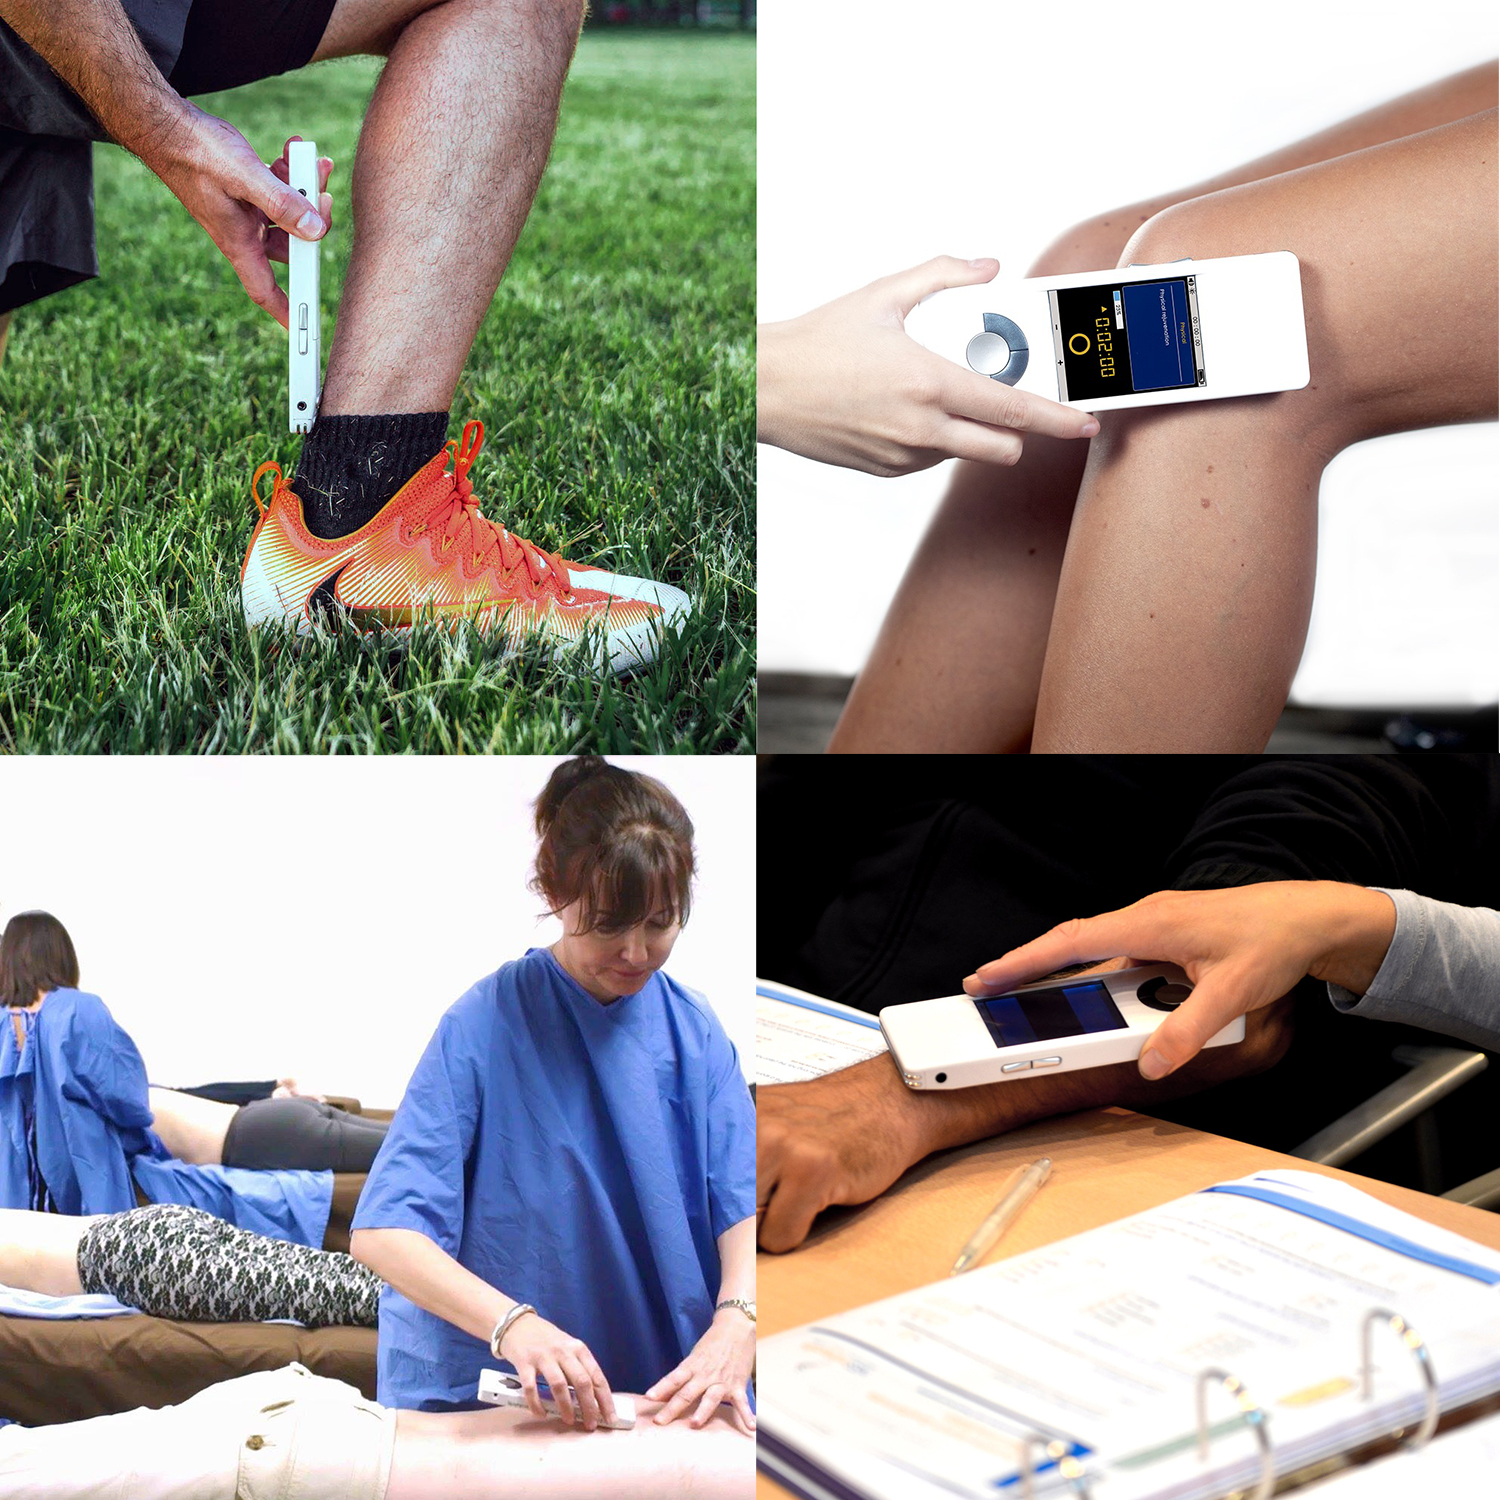 NES miHealth - your personal bioenergetic health companion that incorporates PEMF therapy, body field scan and restoring healthy mind body pattern in a handheld, non-invasive biofeedback device.